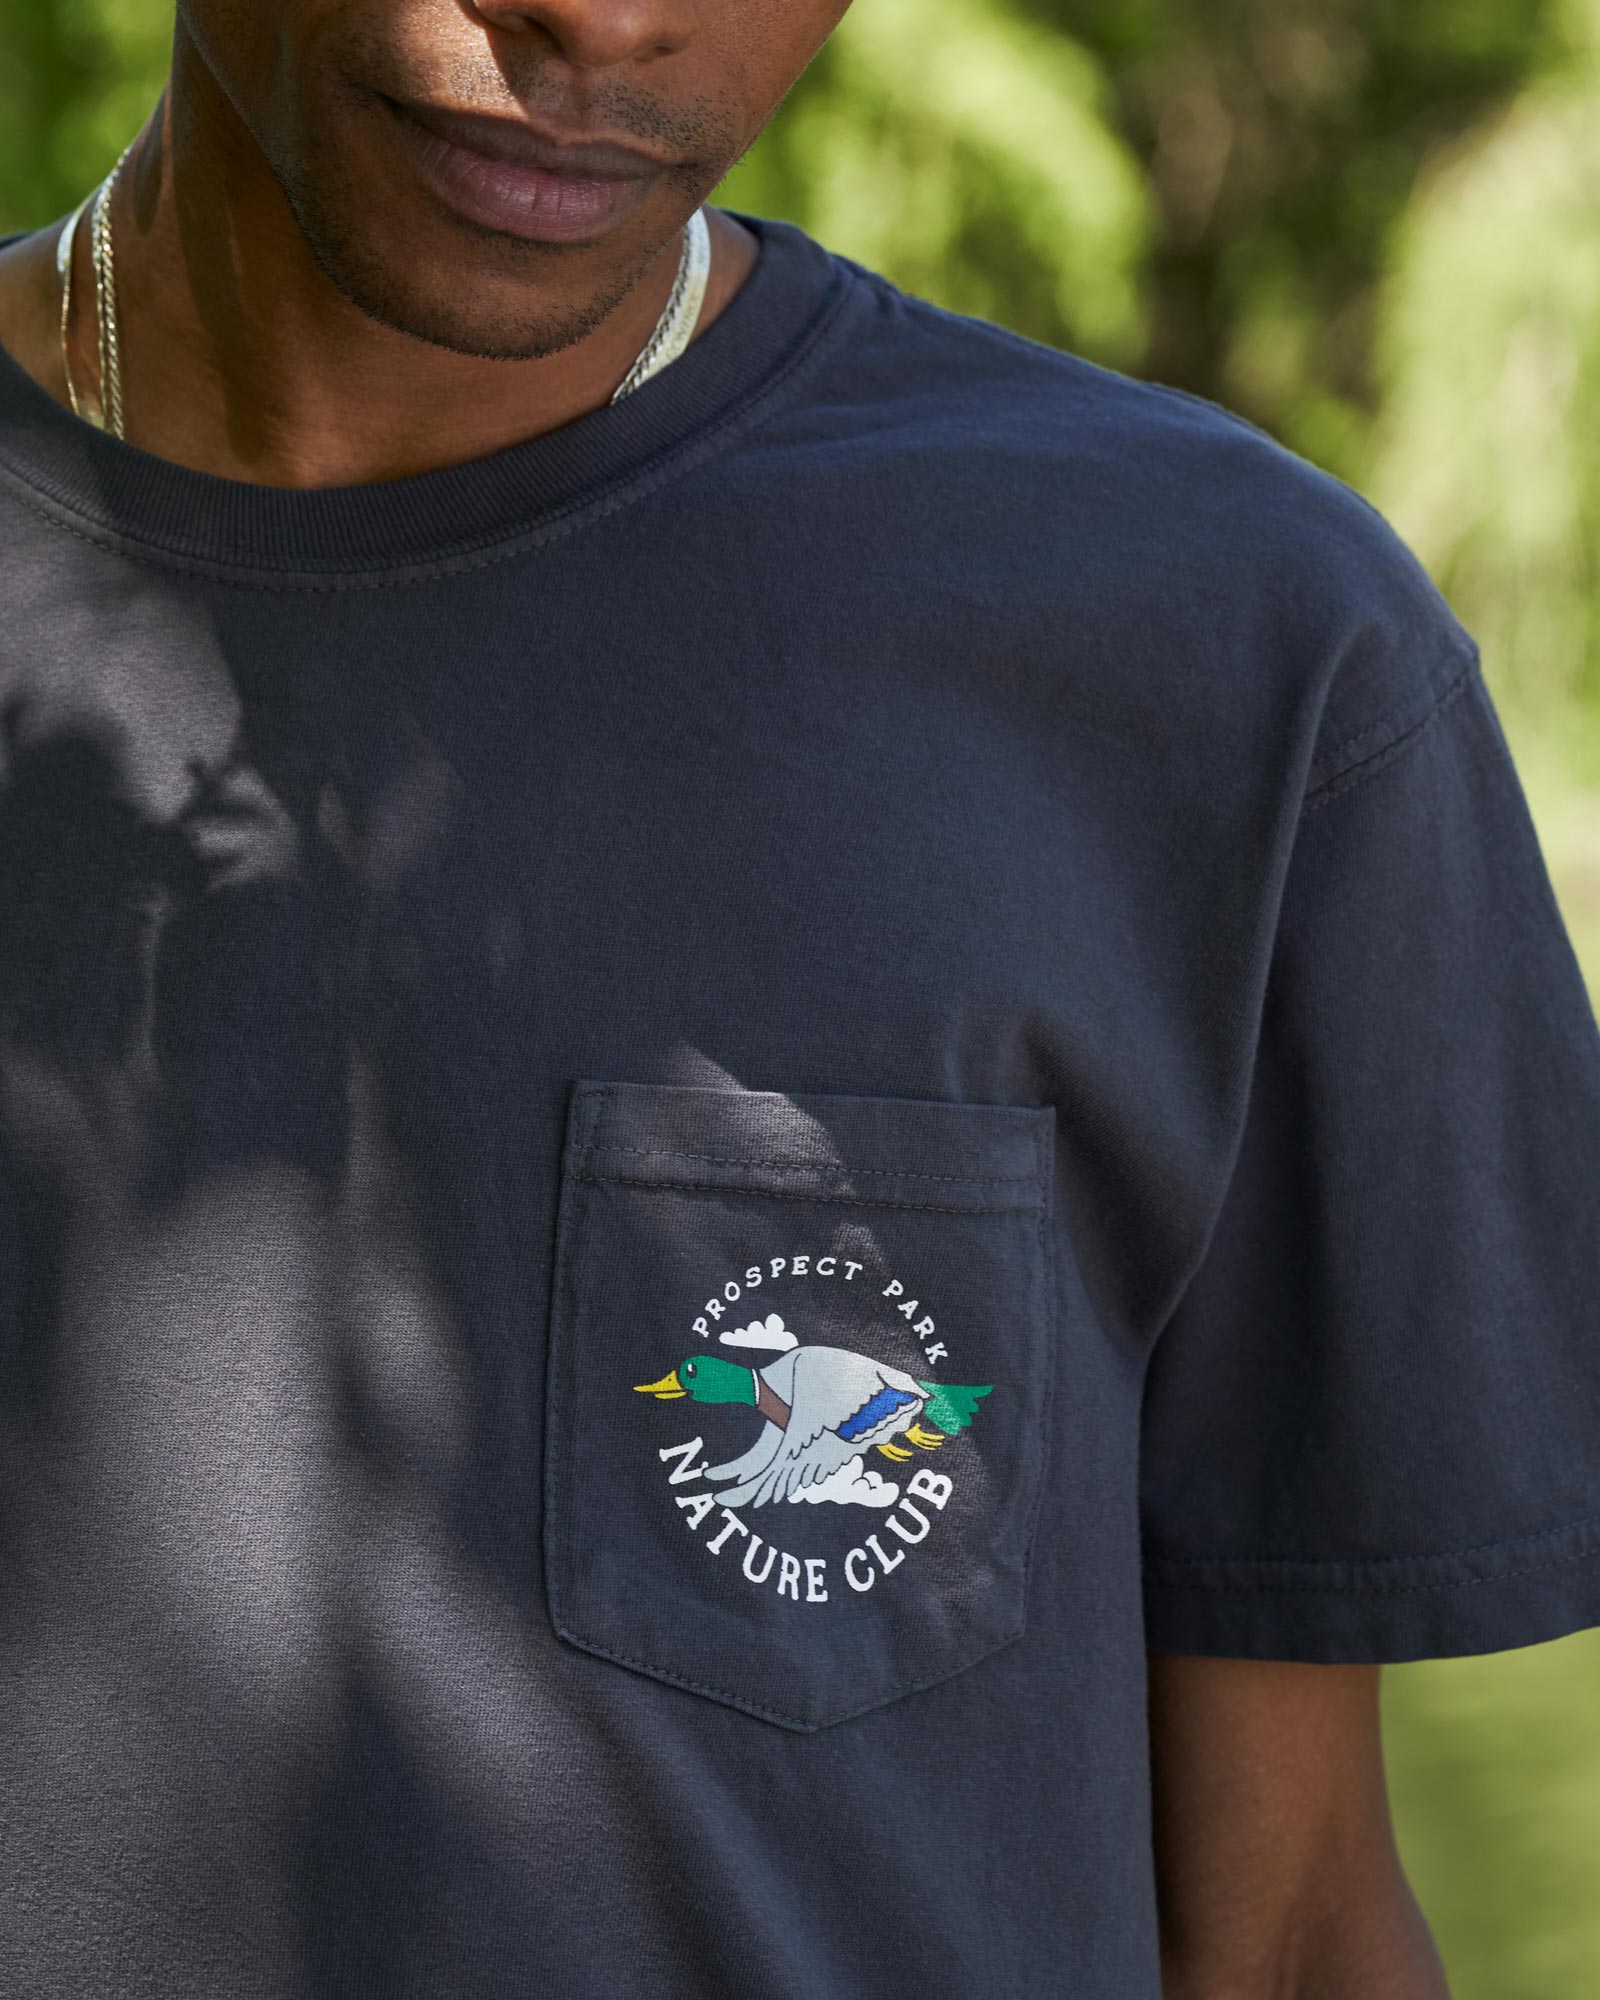 Parks Project Nature Club Pocket Tee